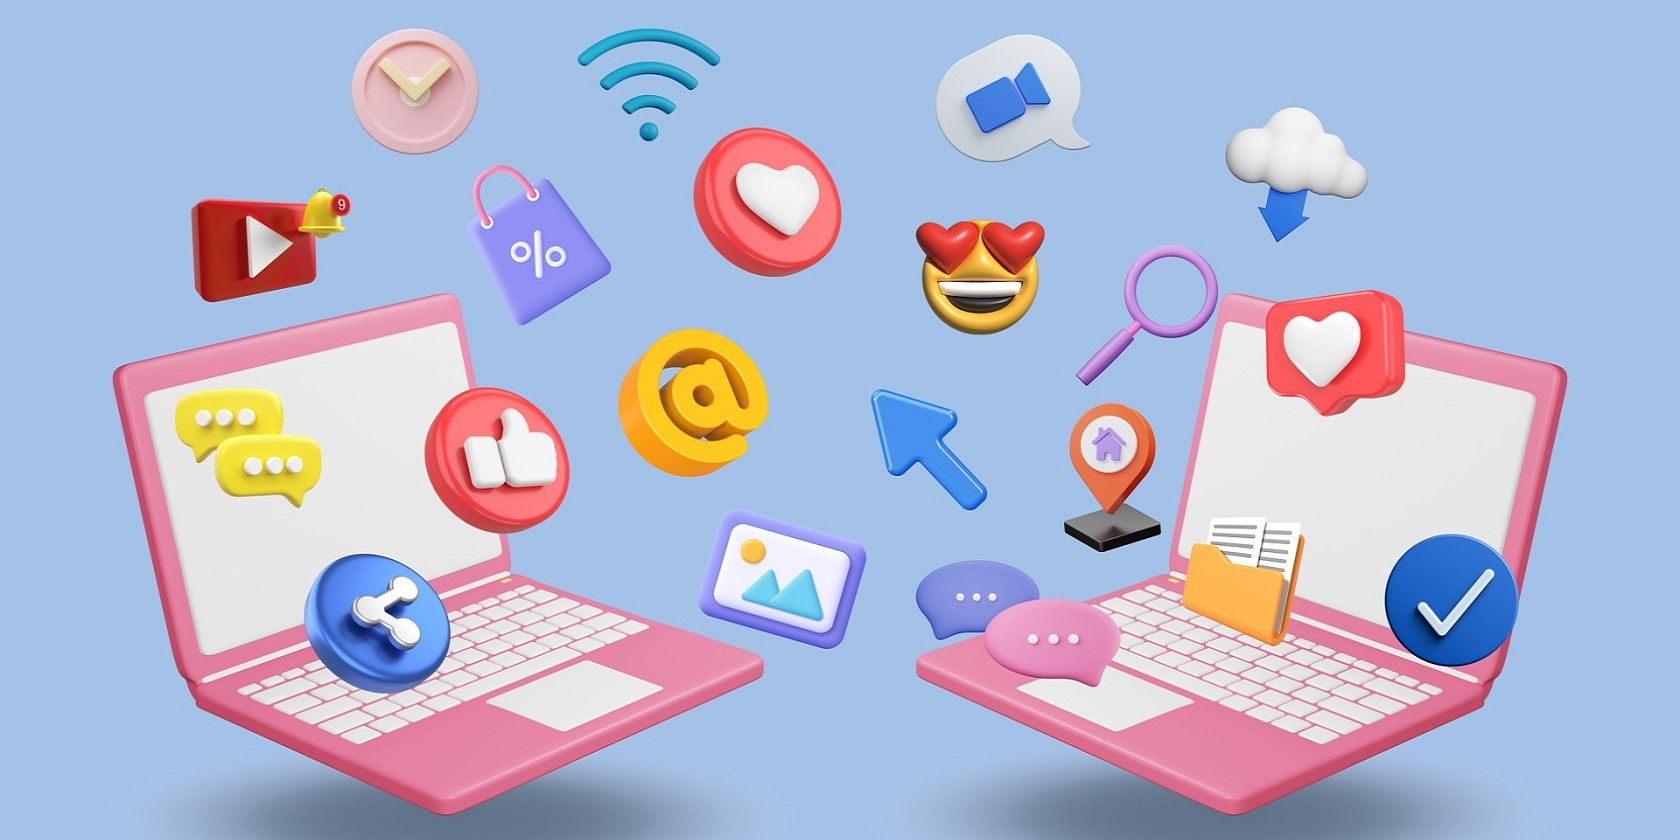 Illustration of two computers and app icons